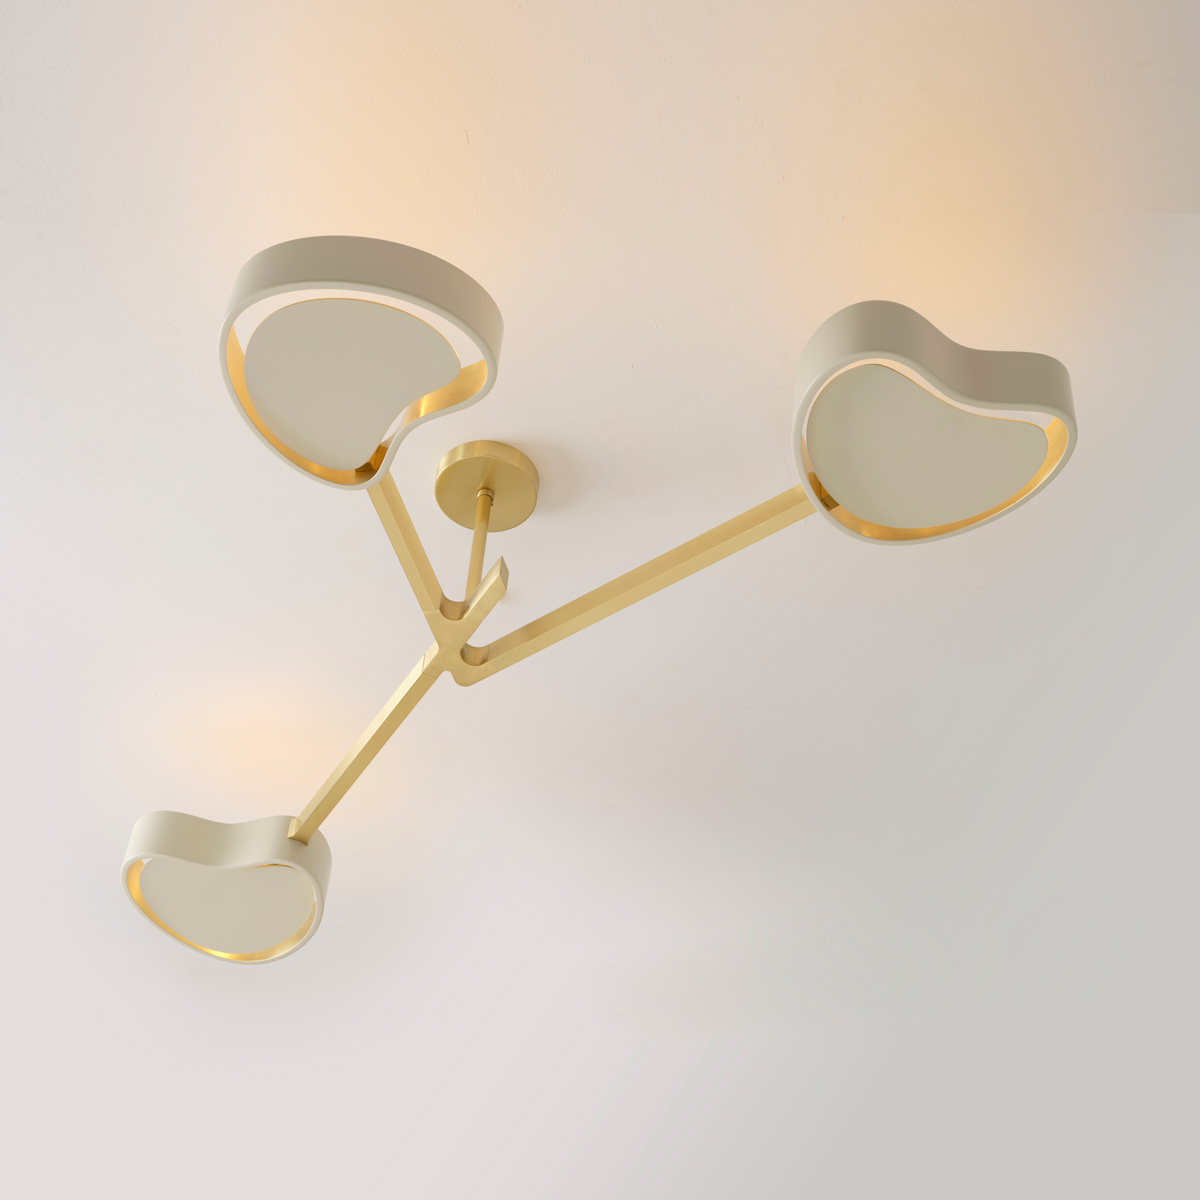 Cuore N3 ceiling light by Gaspare Asaro